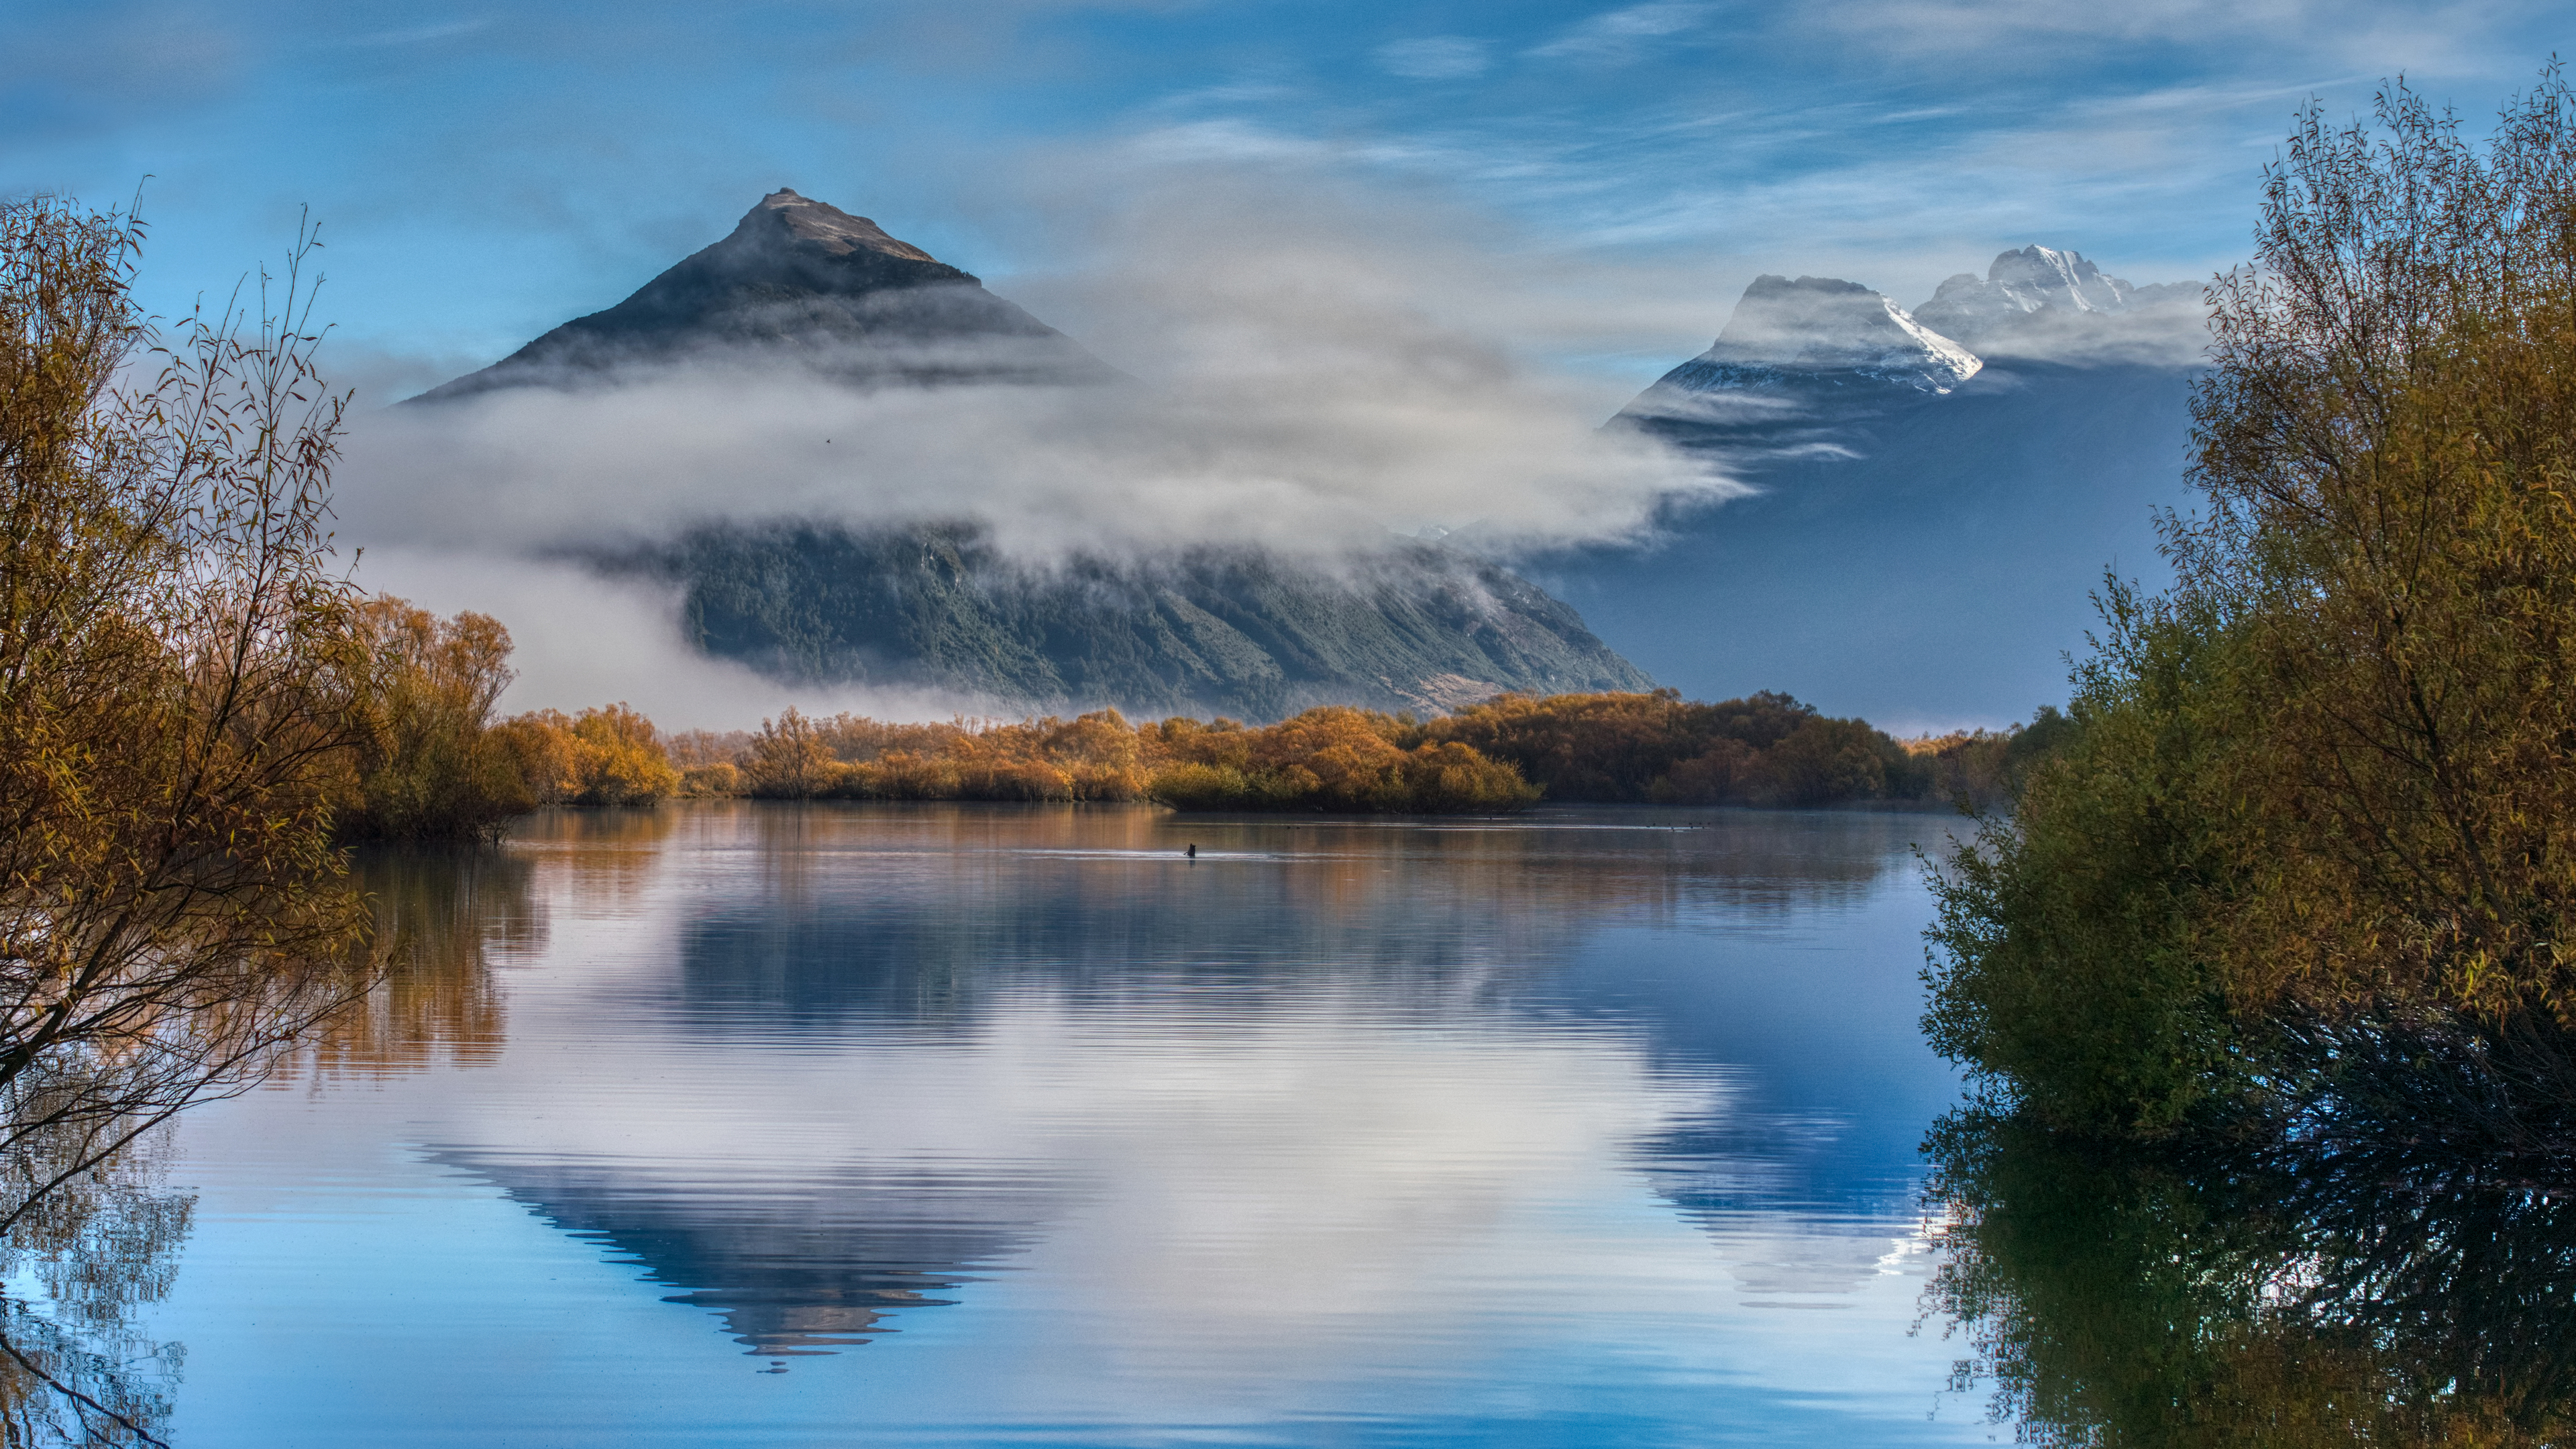 General 3840x2160 landscape 4K New Zealand nature water reflection mountains clouds